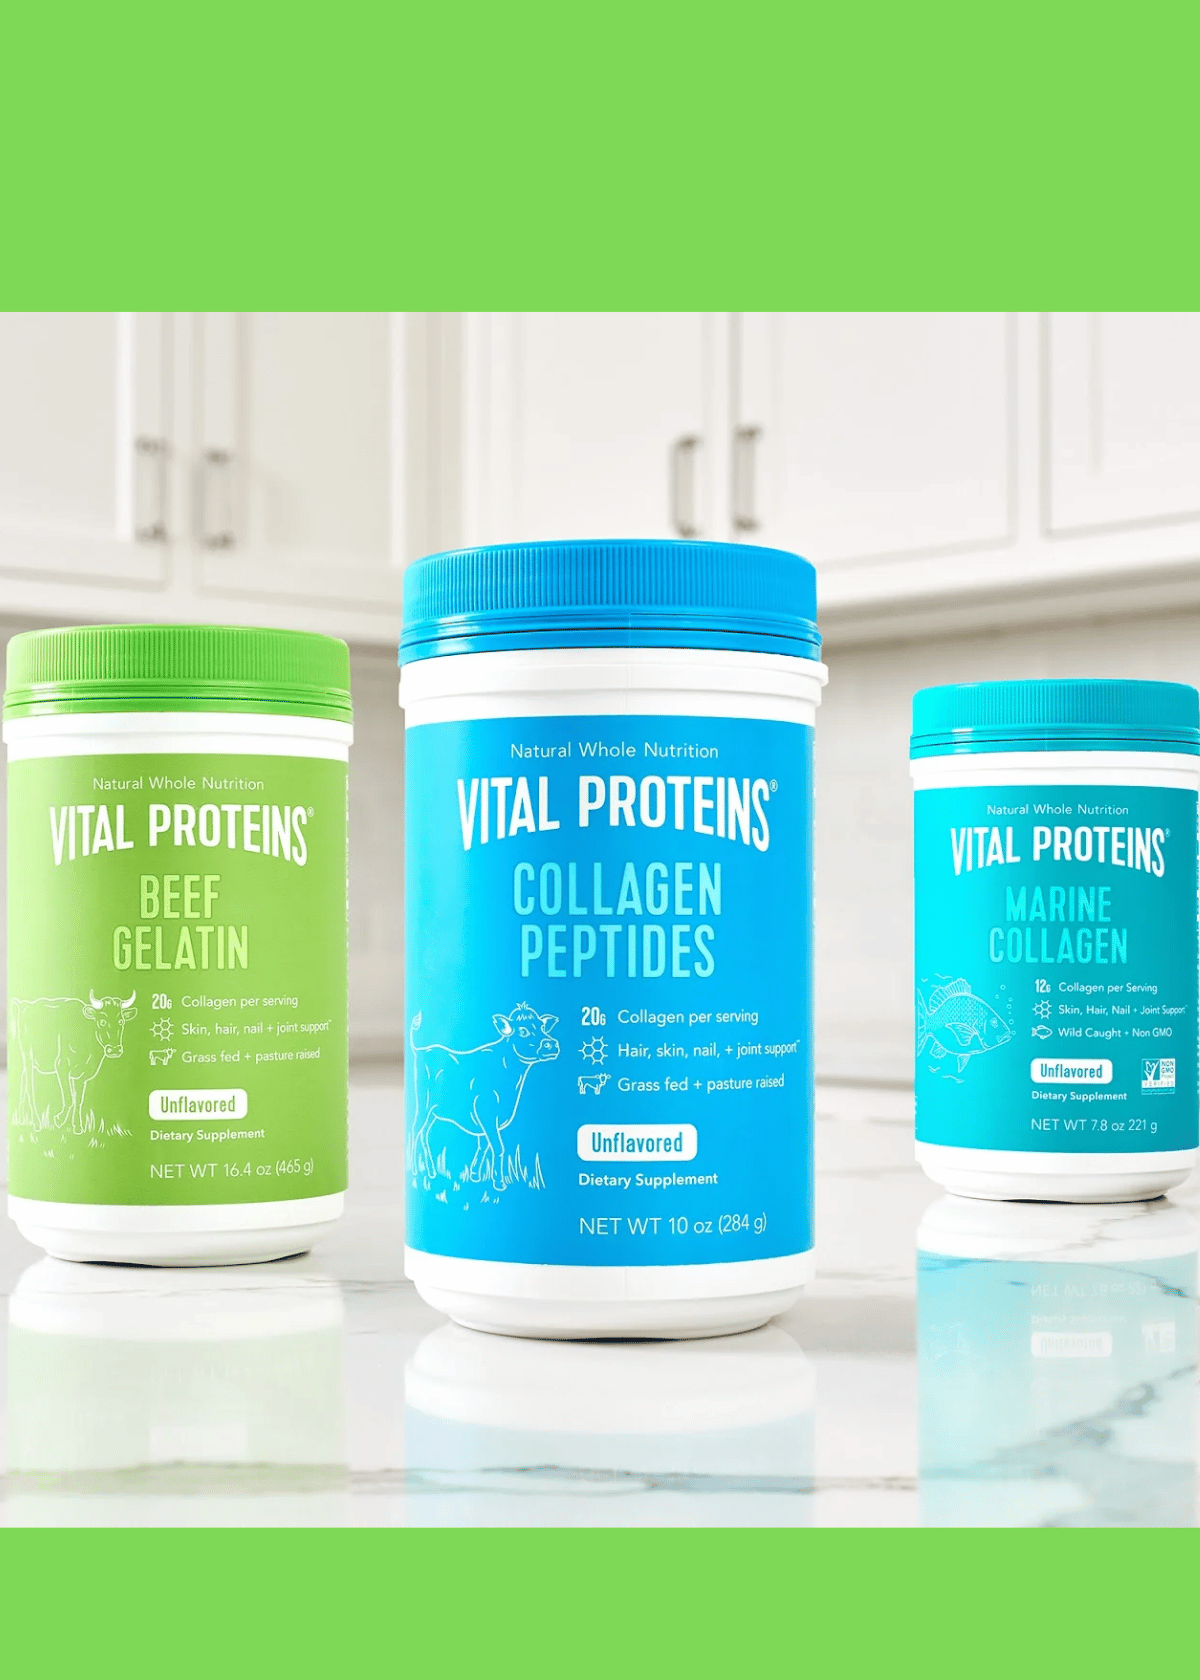 where to buy vital proteins